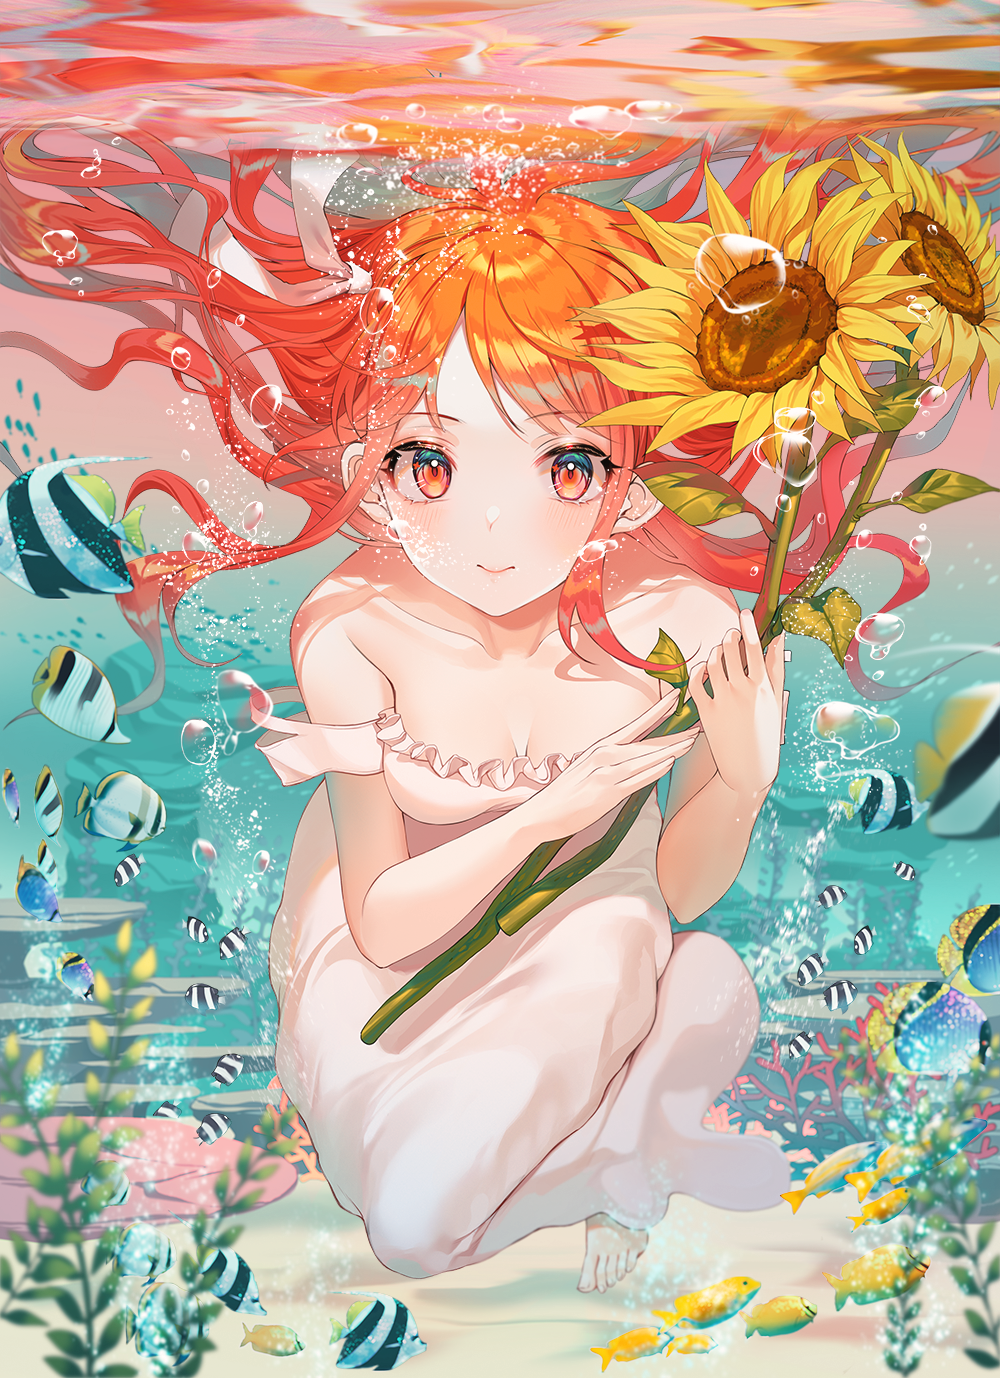 Anime Girls Portrait Display Underwater Tropical Fish Looking At Viewer Dress White Dress Long Hair  1000x1378